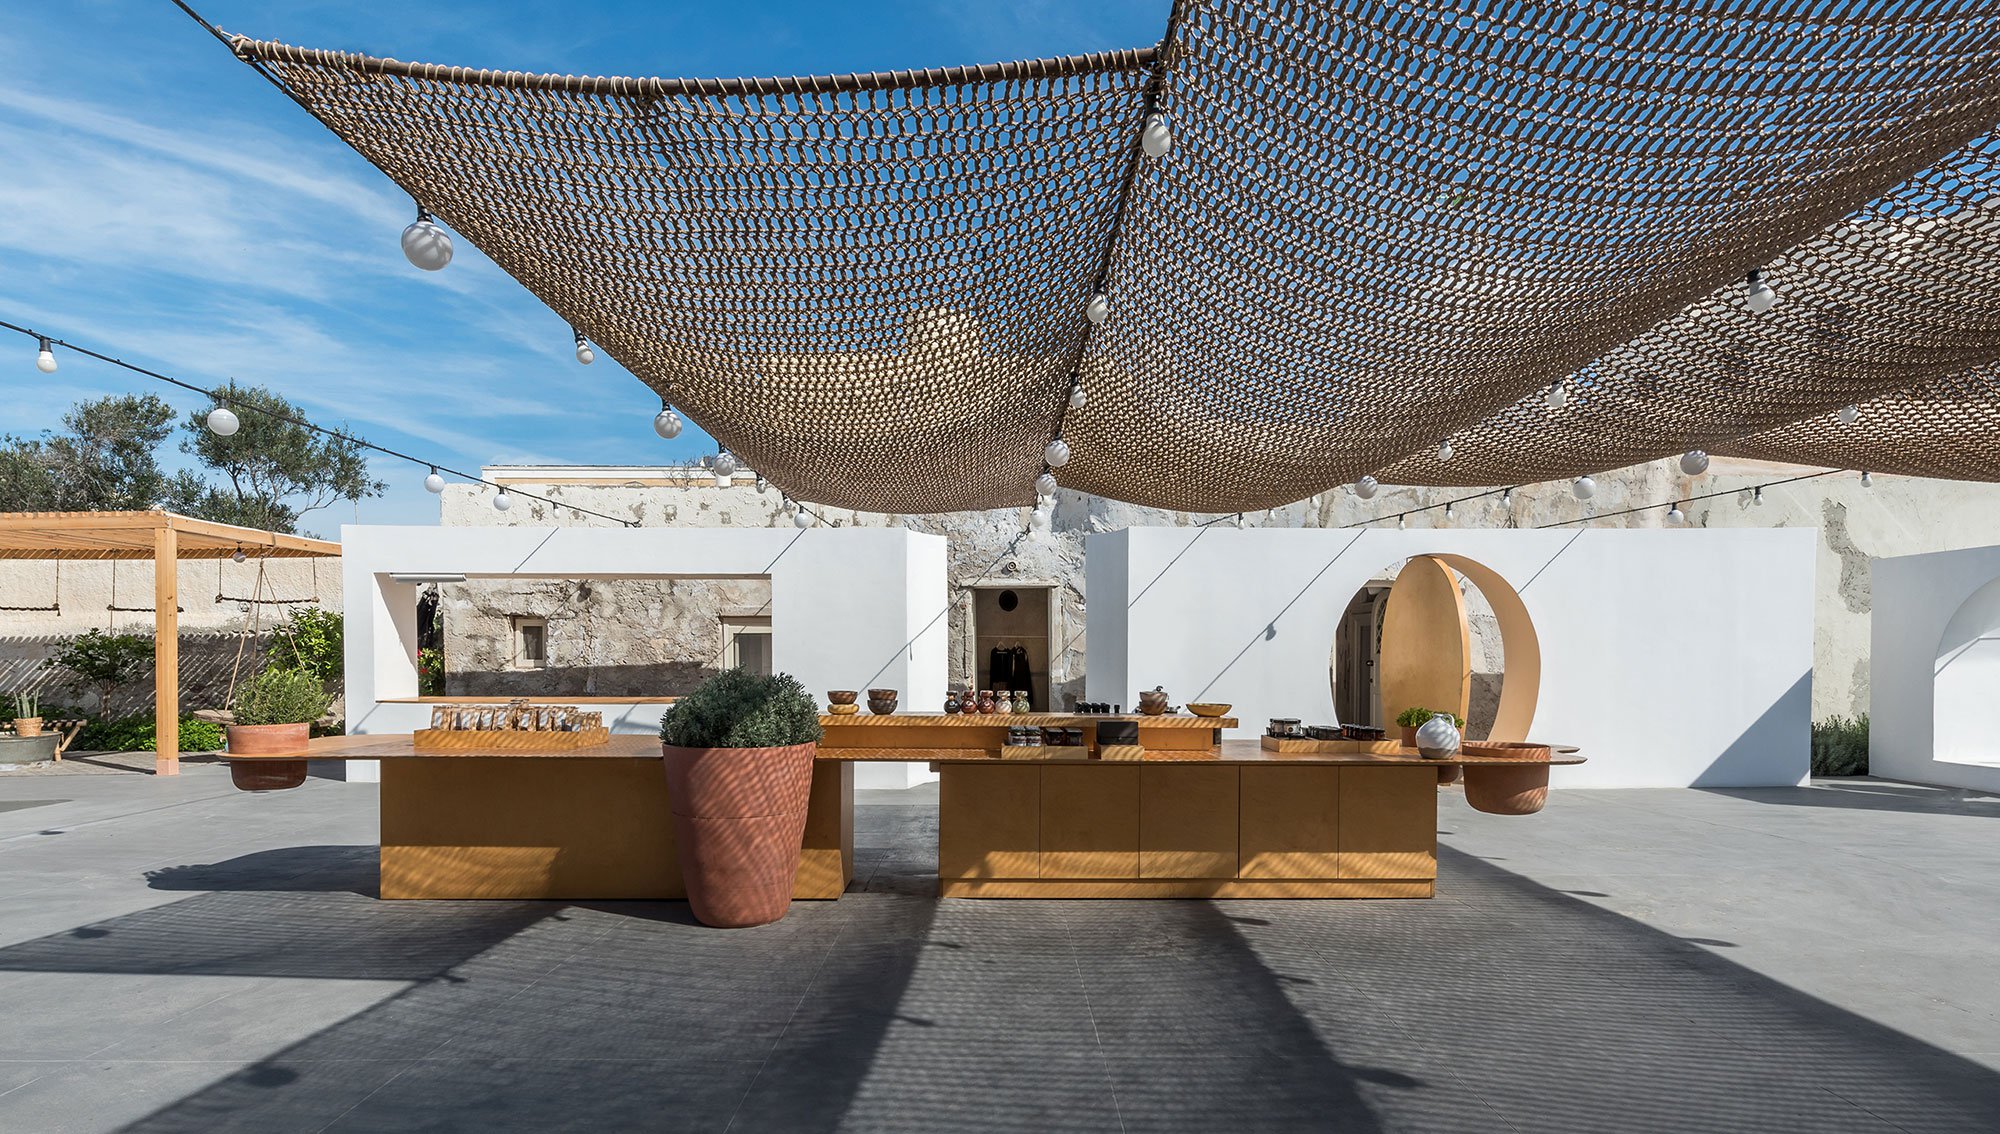 Cycladic Folklore Meets Contemporary Modernism at the Open Market on Santorini Island-4